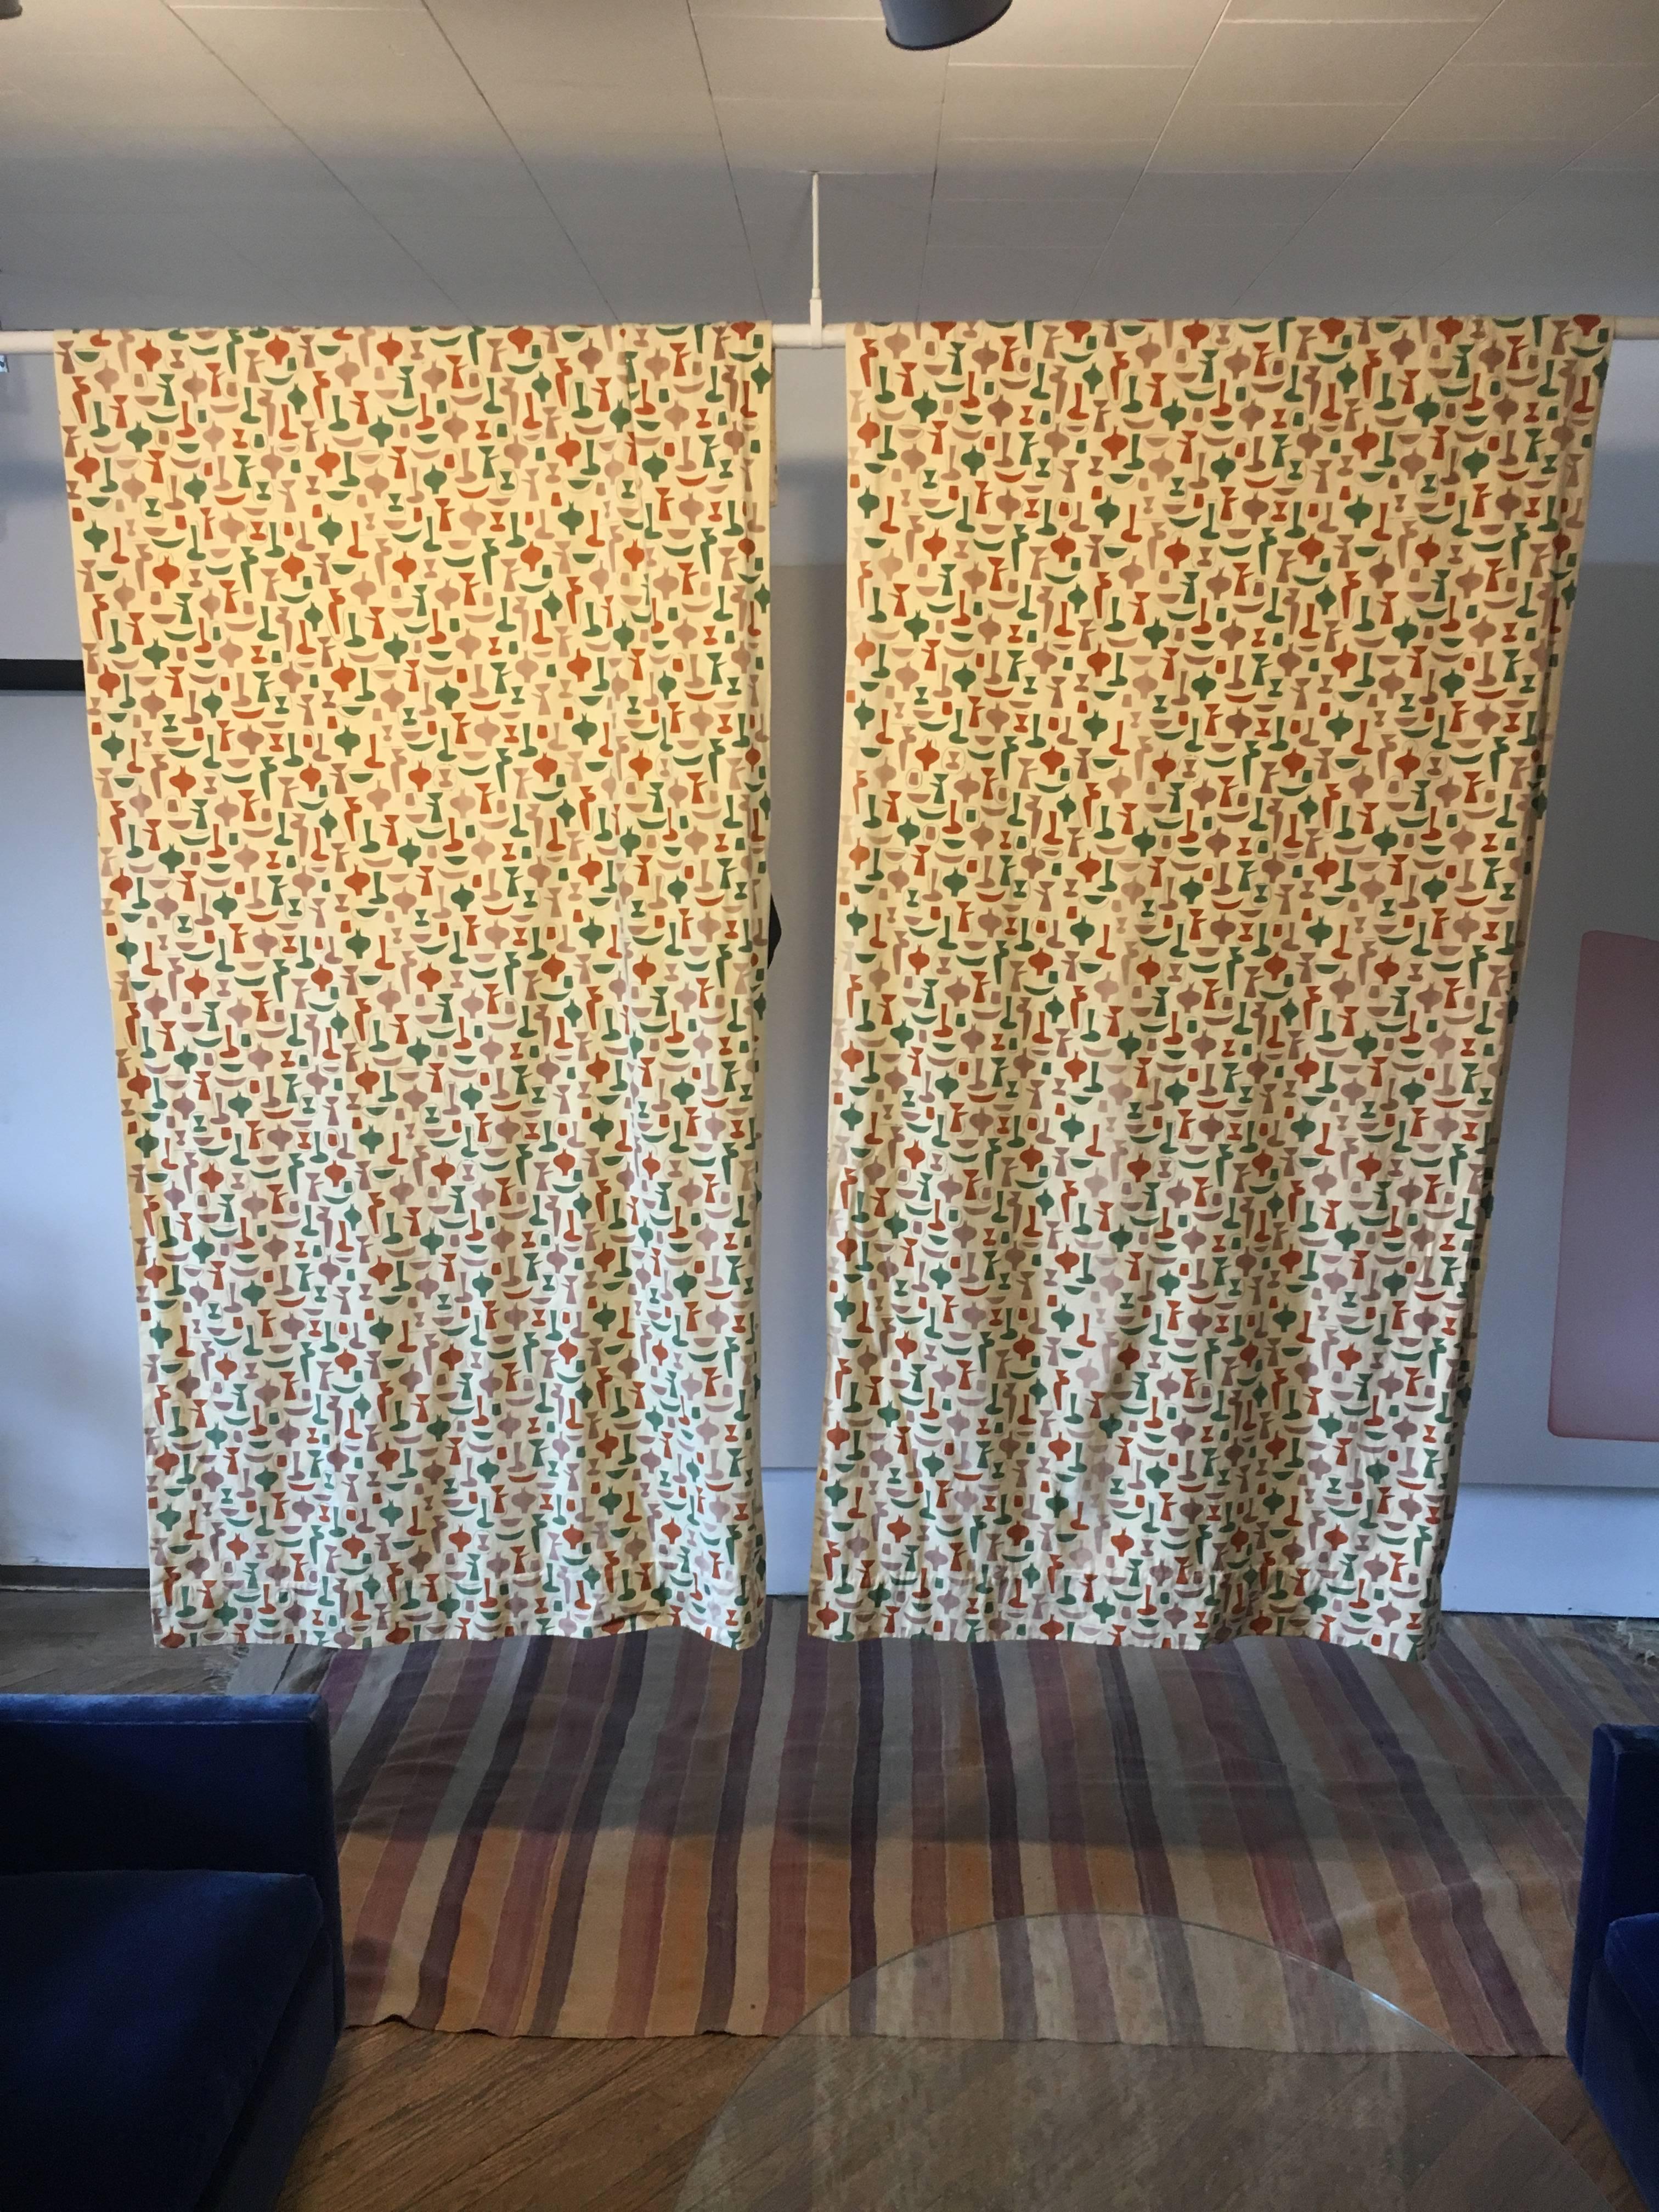 Pair of China shop textile/curtain panels designed by George Nelson, circa 1953.
Hand printed on cotton by Schiffer Prints Division, Mil-Art Co., Inc.

Each panel measures 92